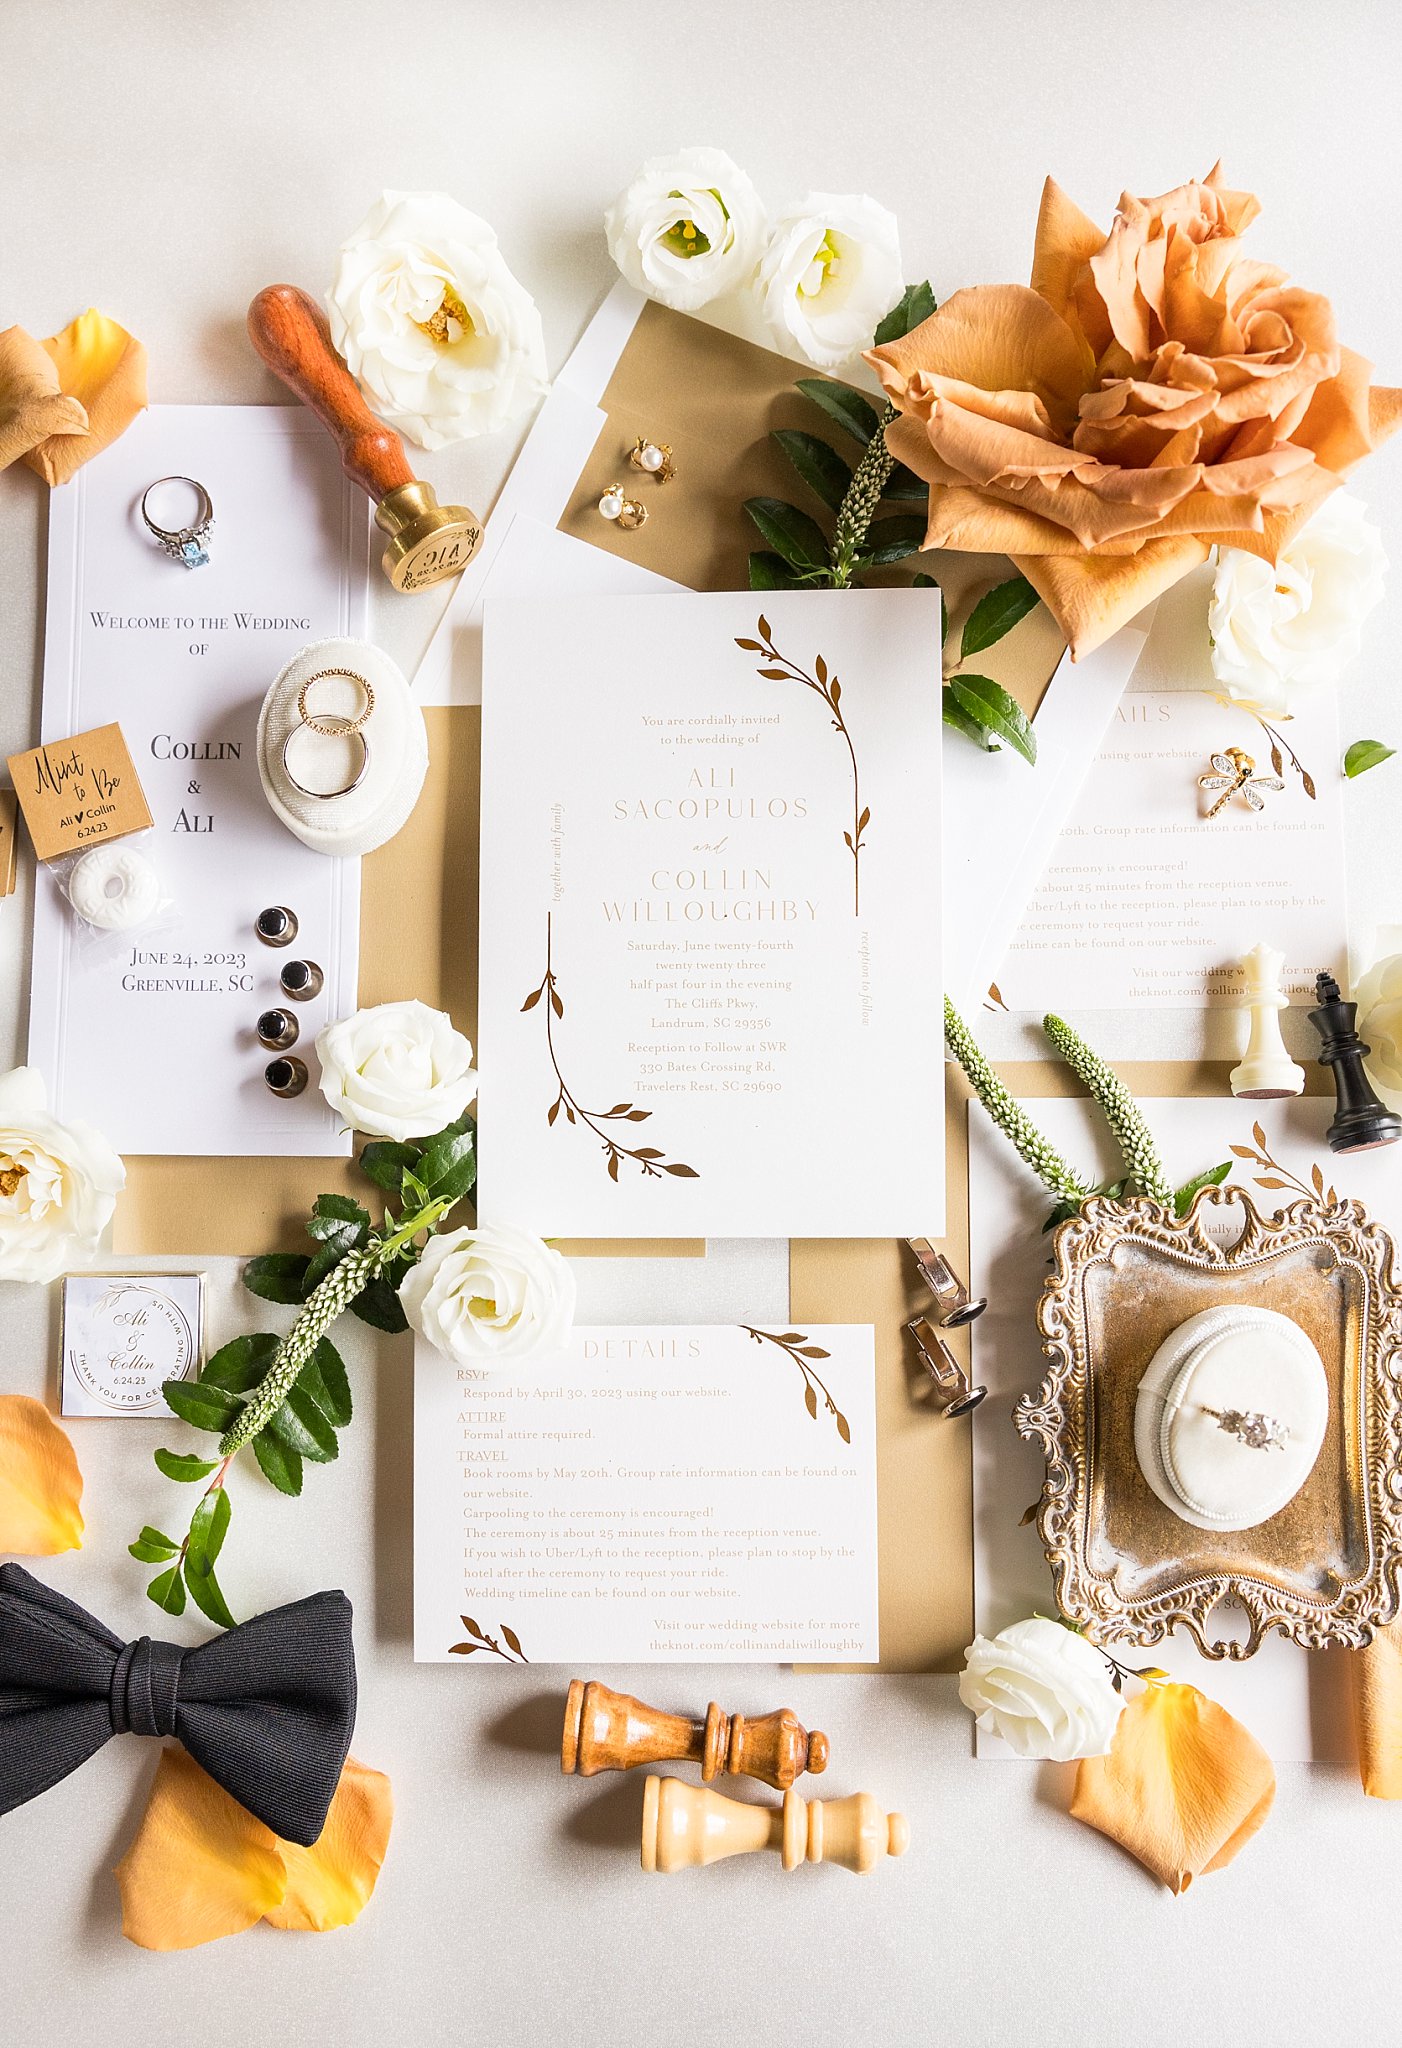 Elegant wedding invitation suite for Ali + Colin's celebration at Cliffs at Glassy Chapel, meticulously photographed by Lace + Honey Weddings, expert Greenville, SC wedding photographers.